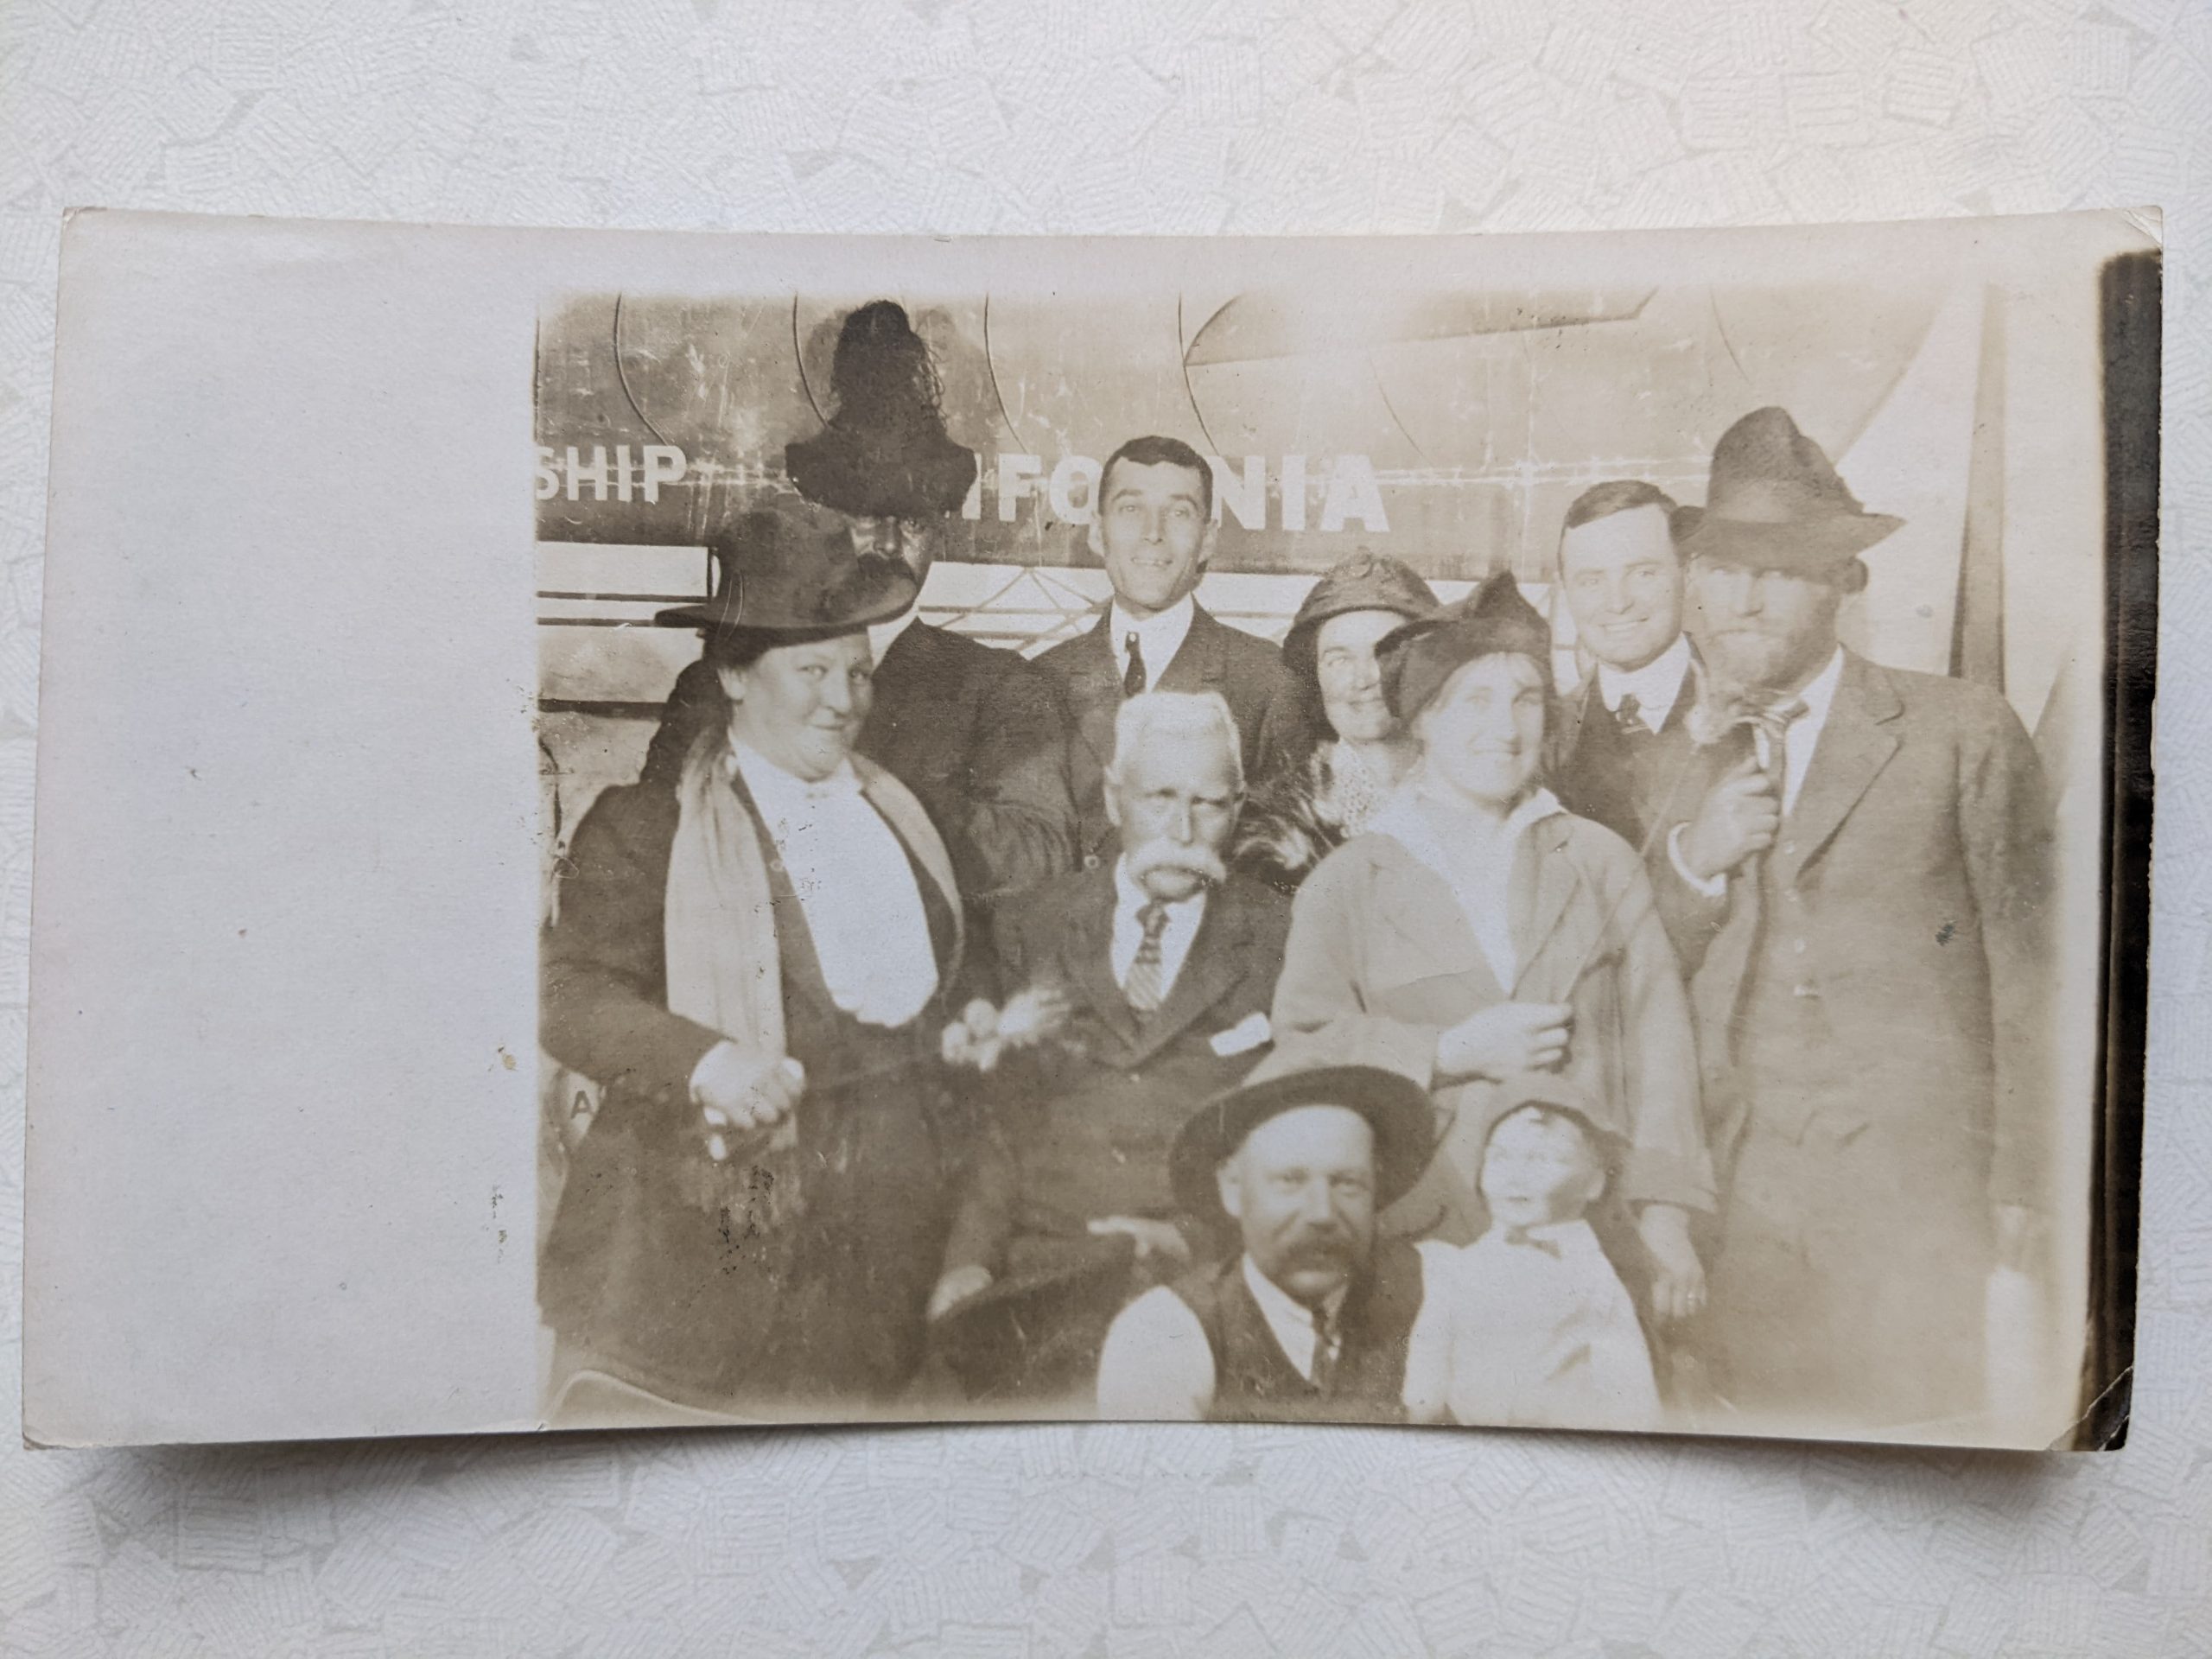 A faded photograph in sepia tones. Nine people and a doll or ventrioquist's dummy are grouped together and posing for the photograph. Some of them appear to be in fancy dress, but it's difficult to make out exactly what people are wearing.